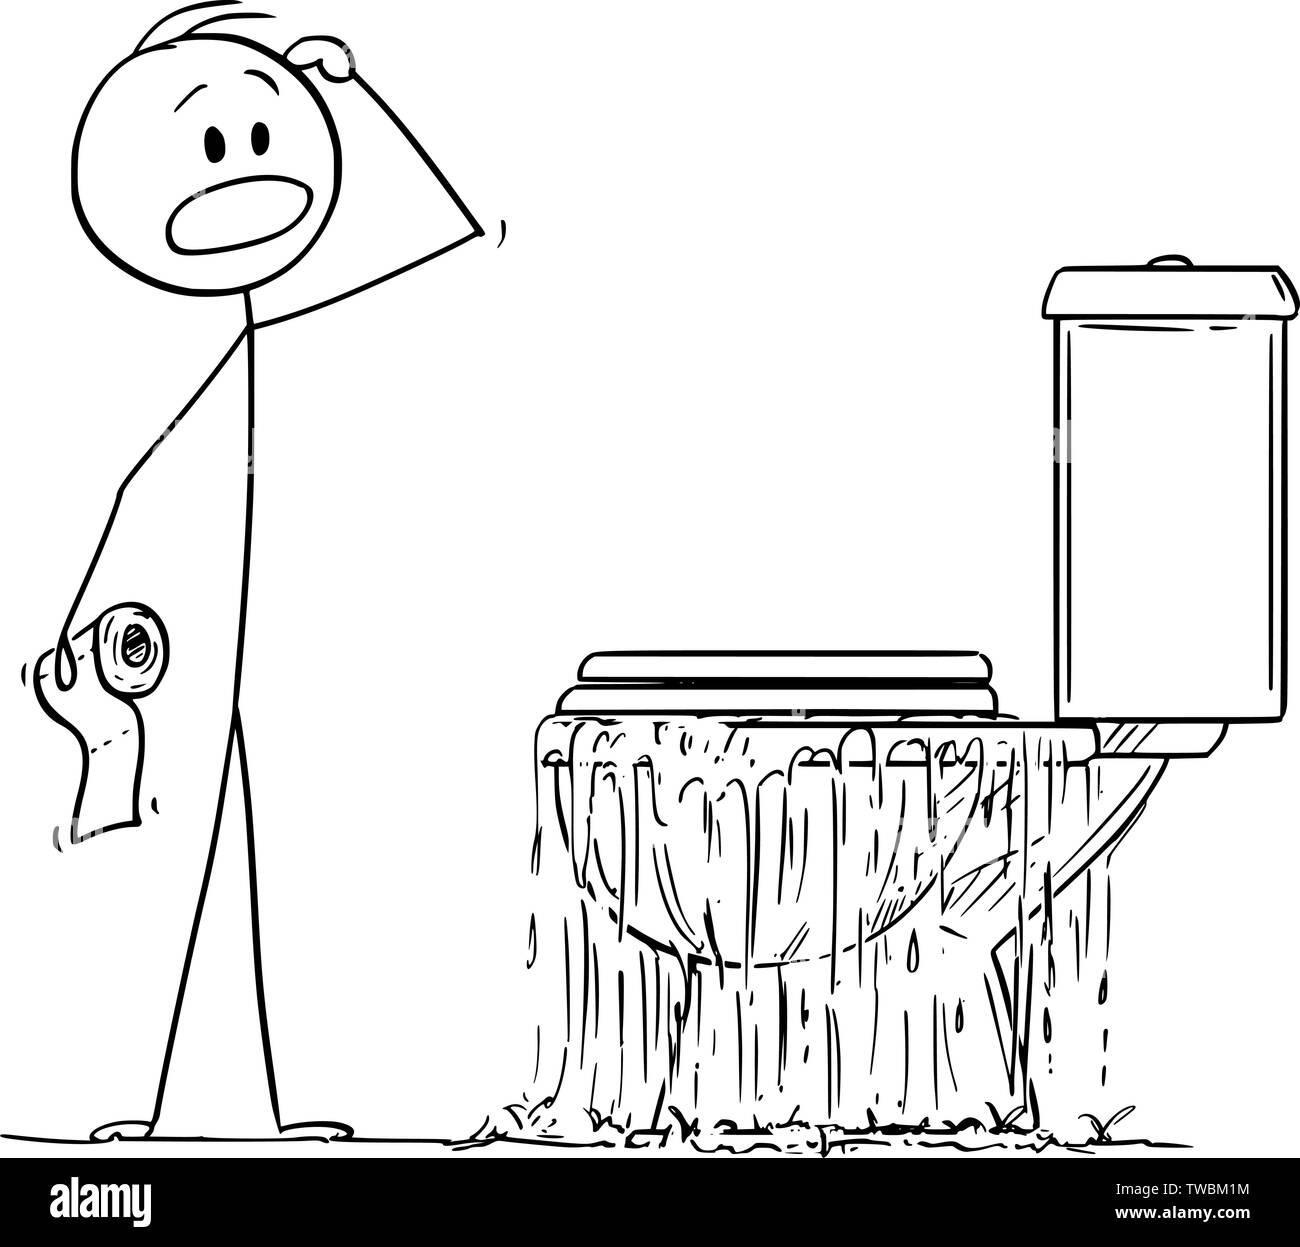 Vector cartoon stick figure drawing conceptual illustration of stressed man looking at overflowing toilet in bedroom and thinking what to do with the problem. Stock Vector